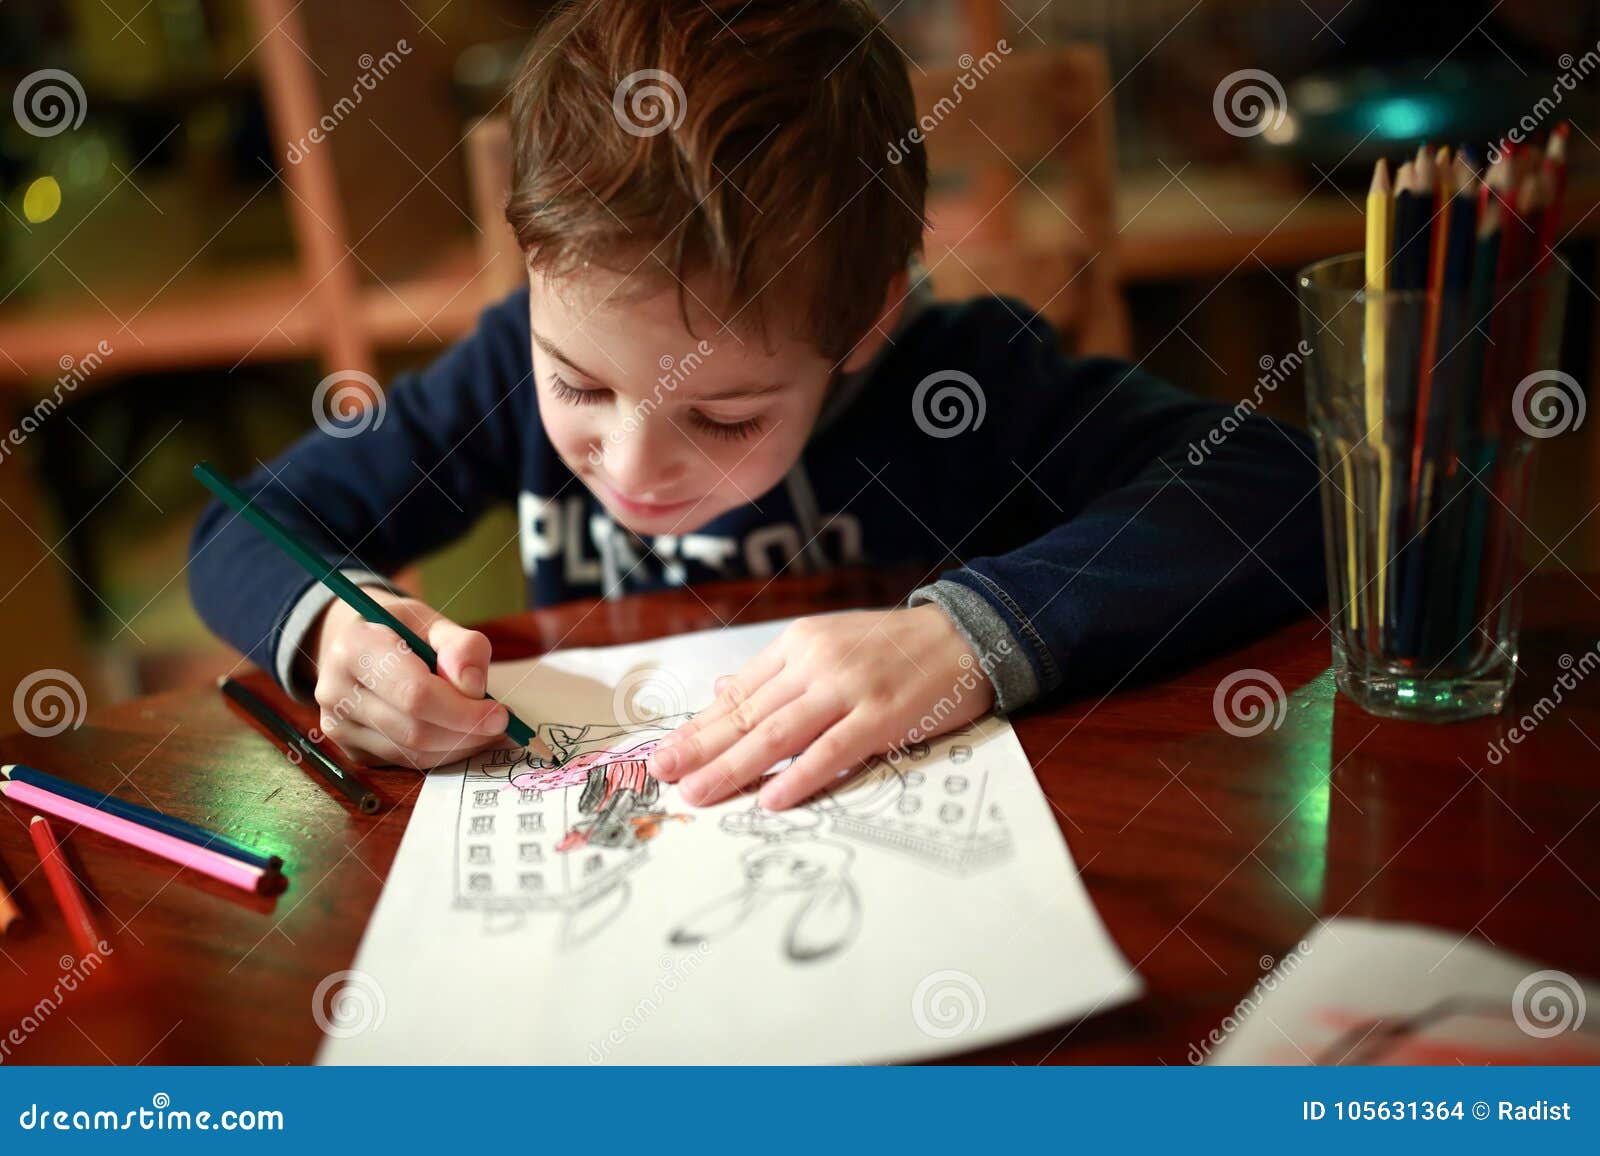 Kid Drawing In Cafe Stock Photo Image Of Expression 105631364